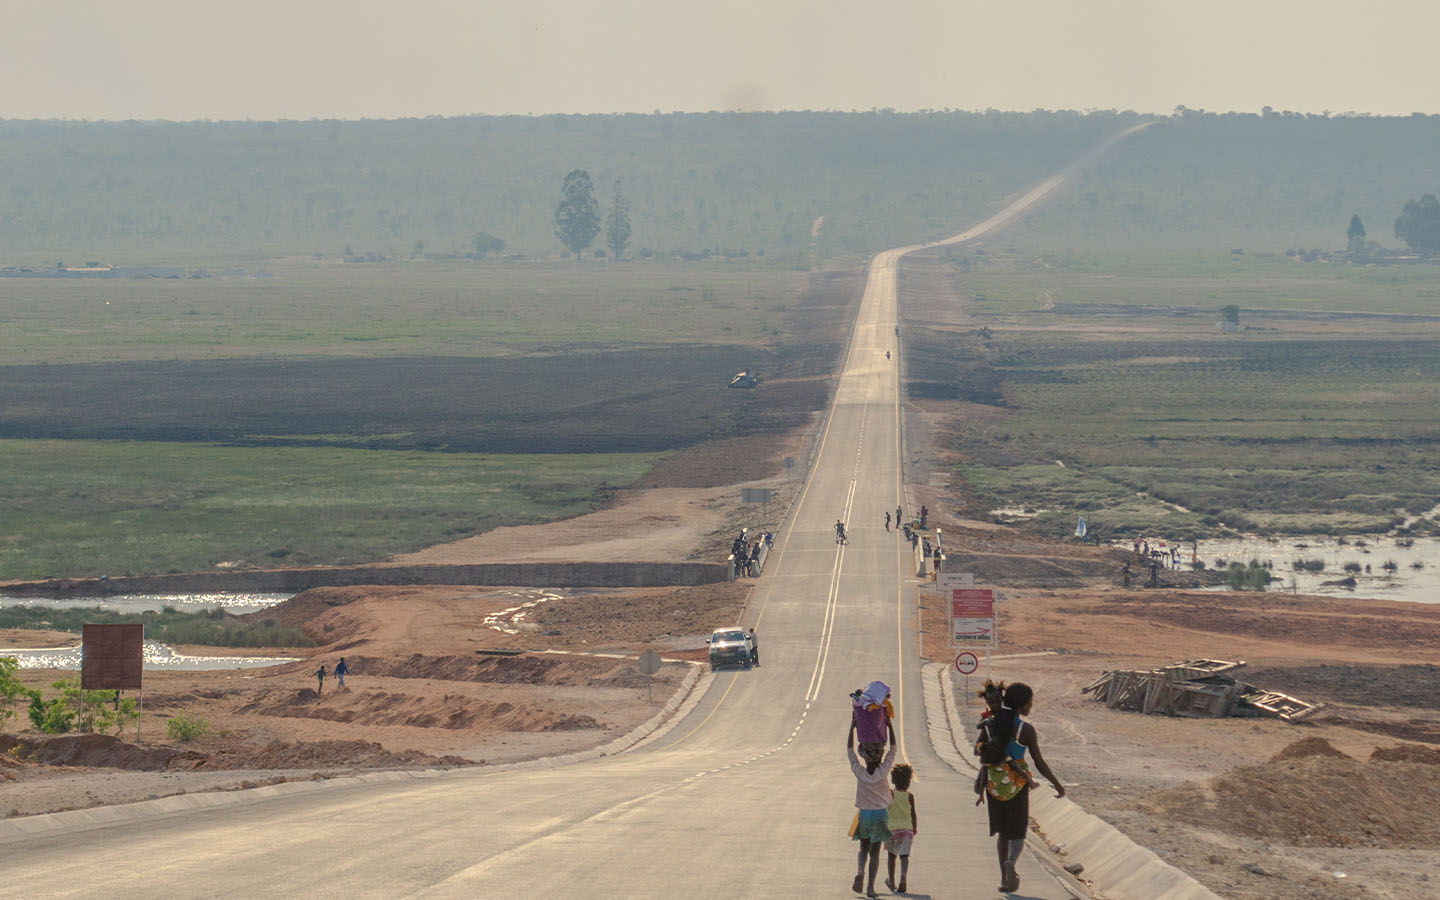 A Chinese state enterprise will build Angola’s first highway